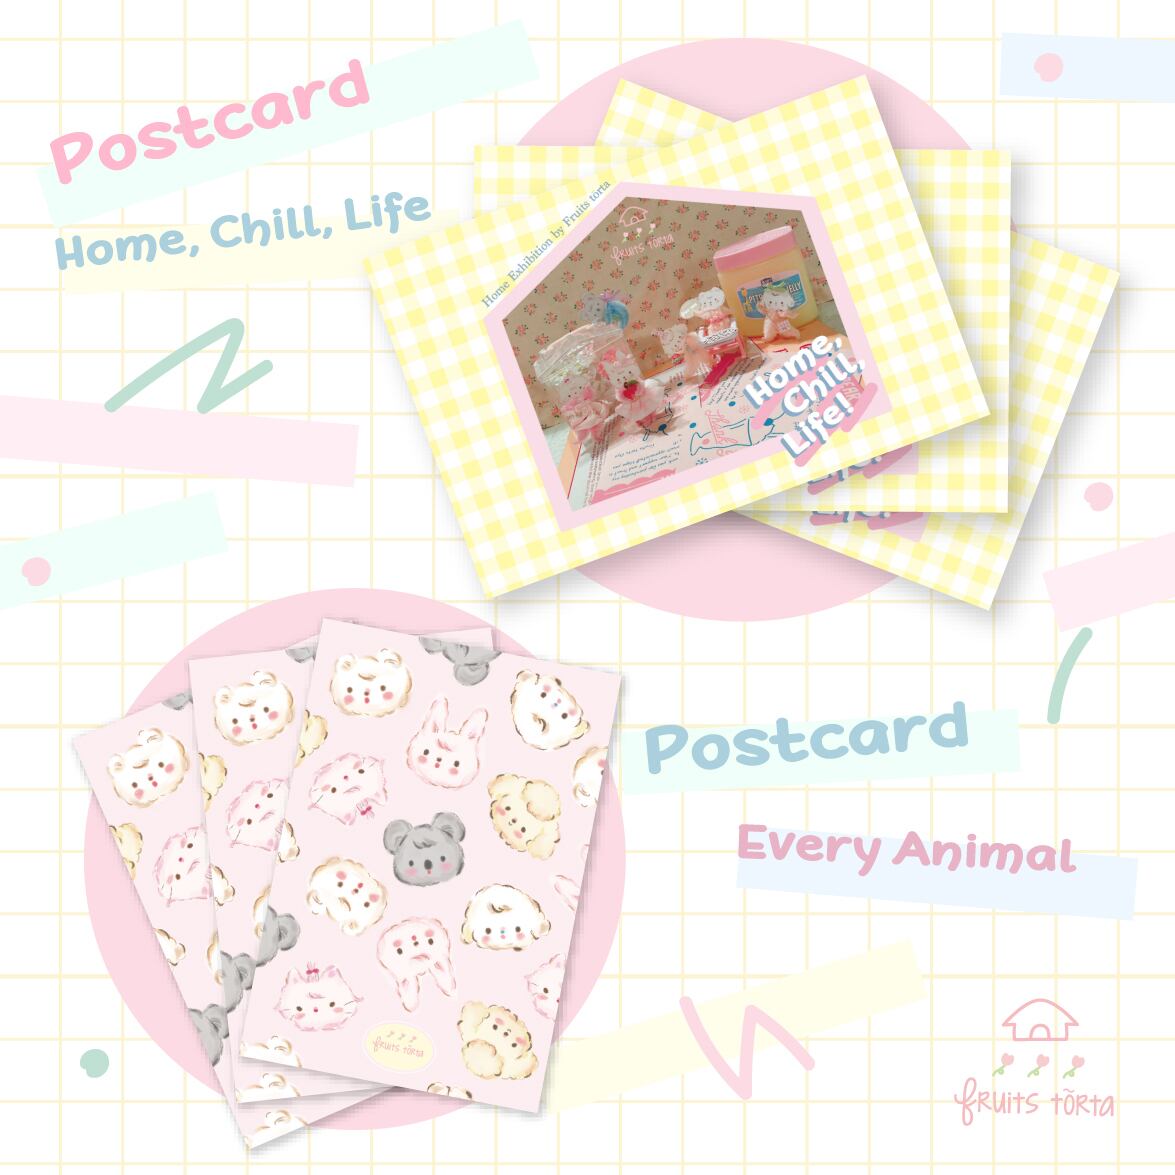 Home, Chill, Life Postercard